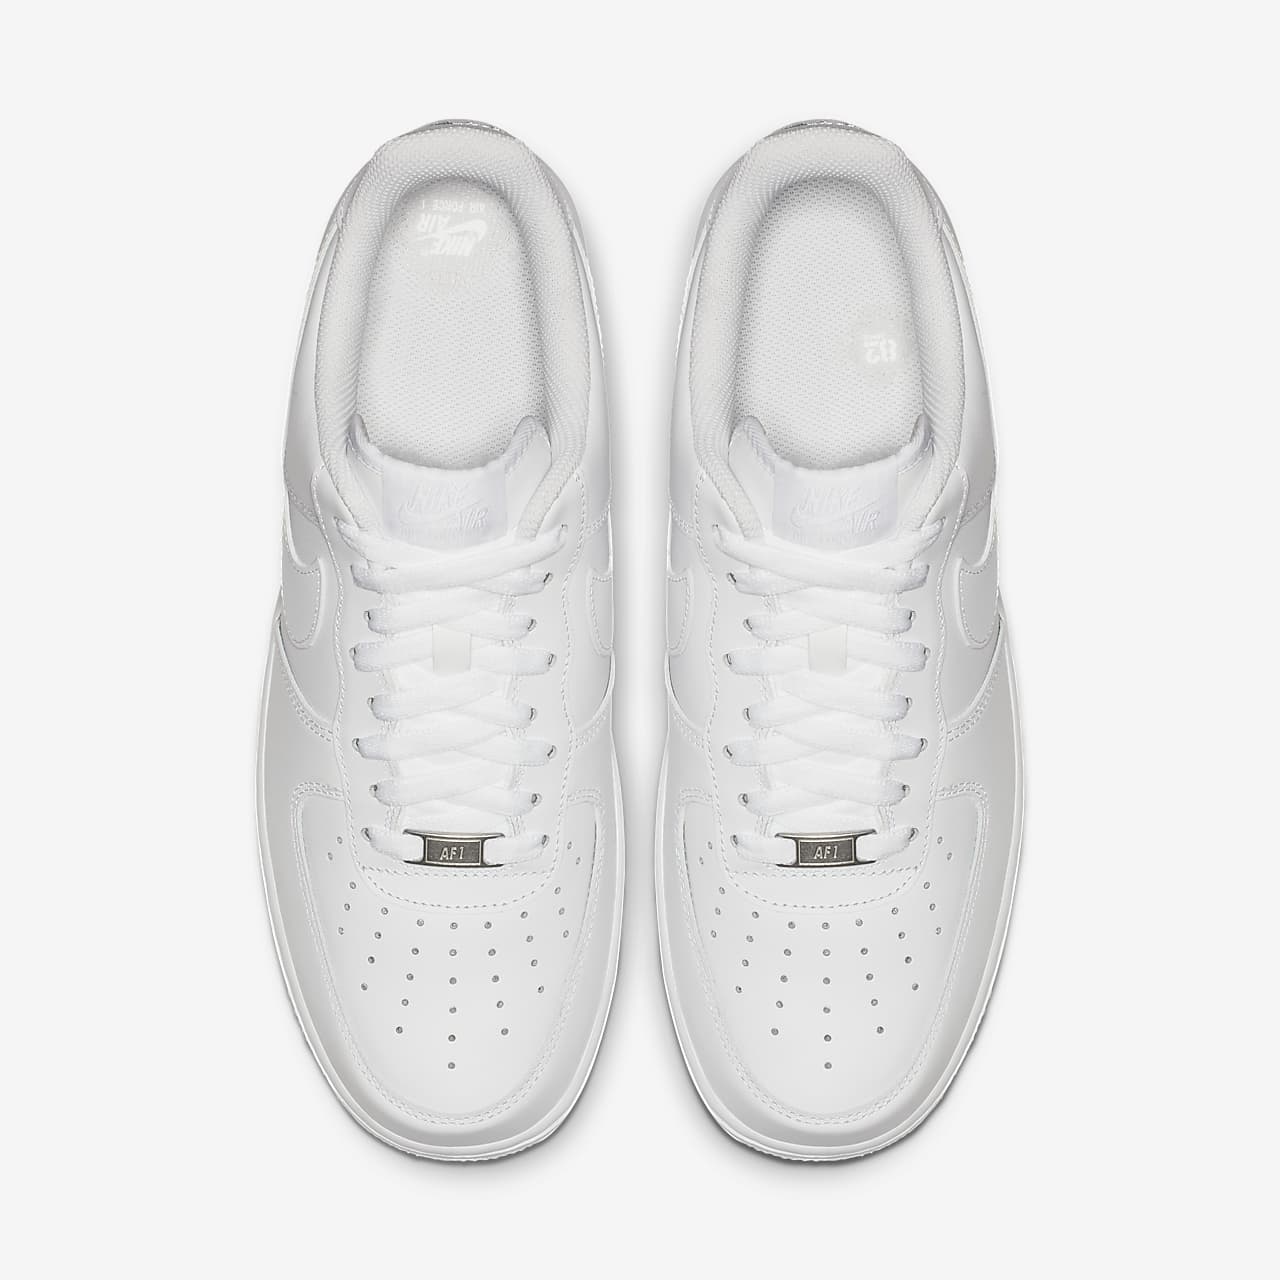 air force white size 8